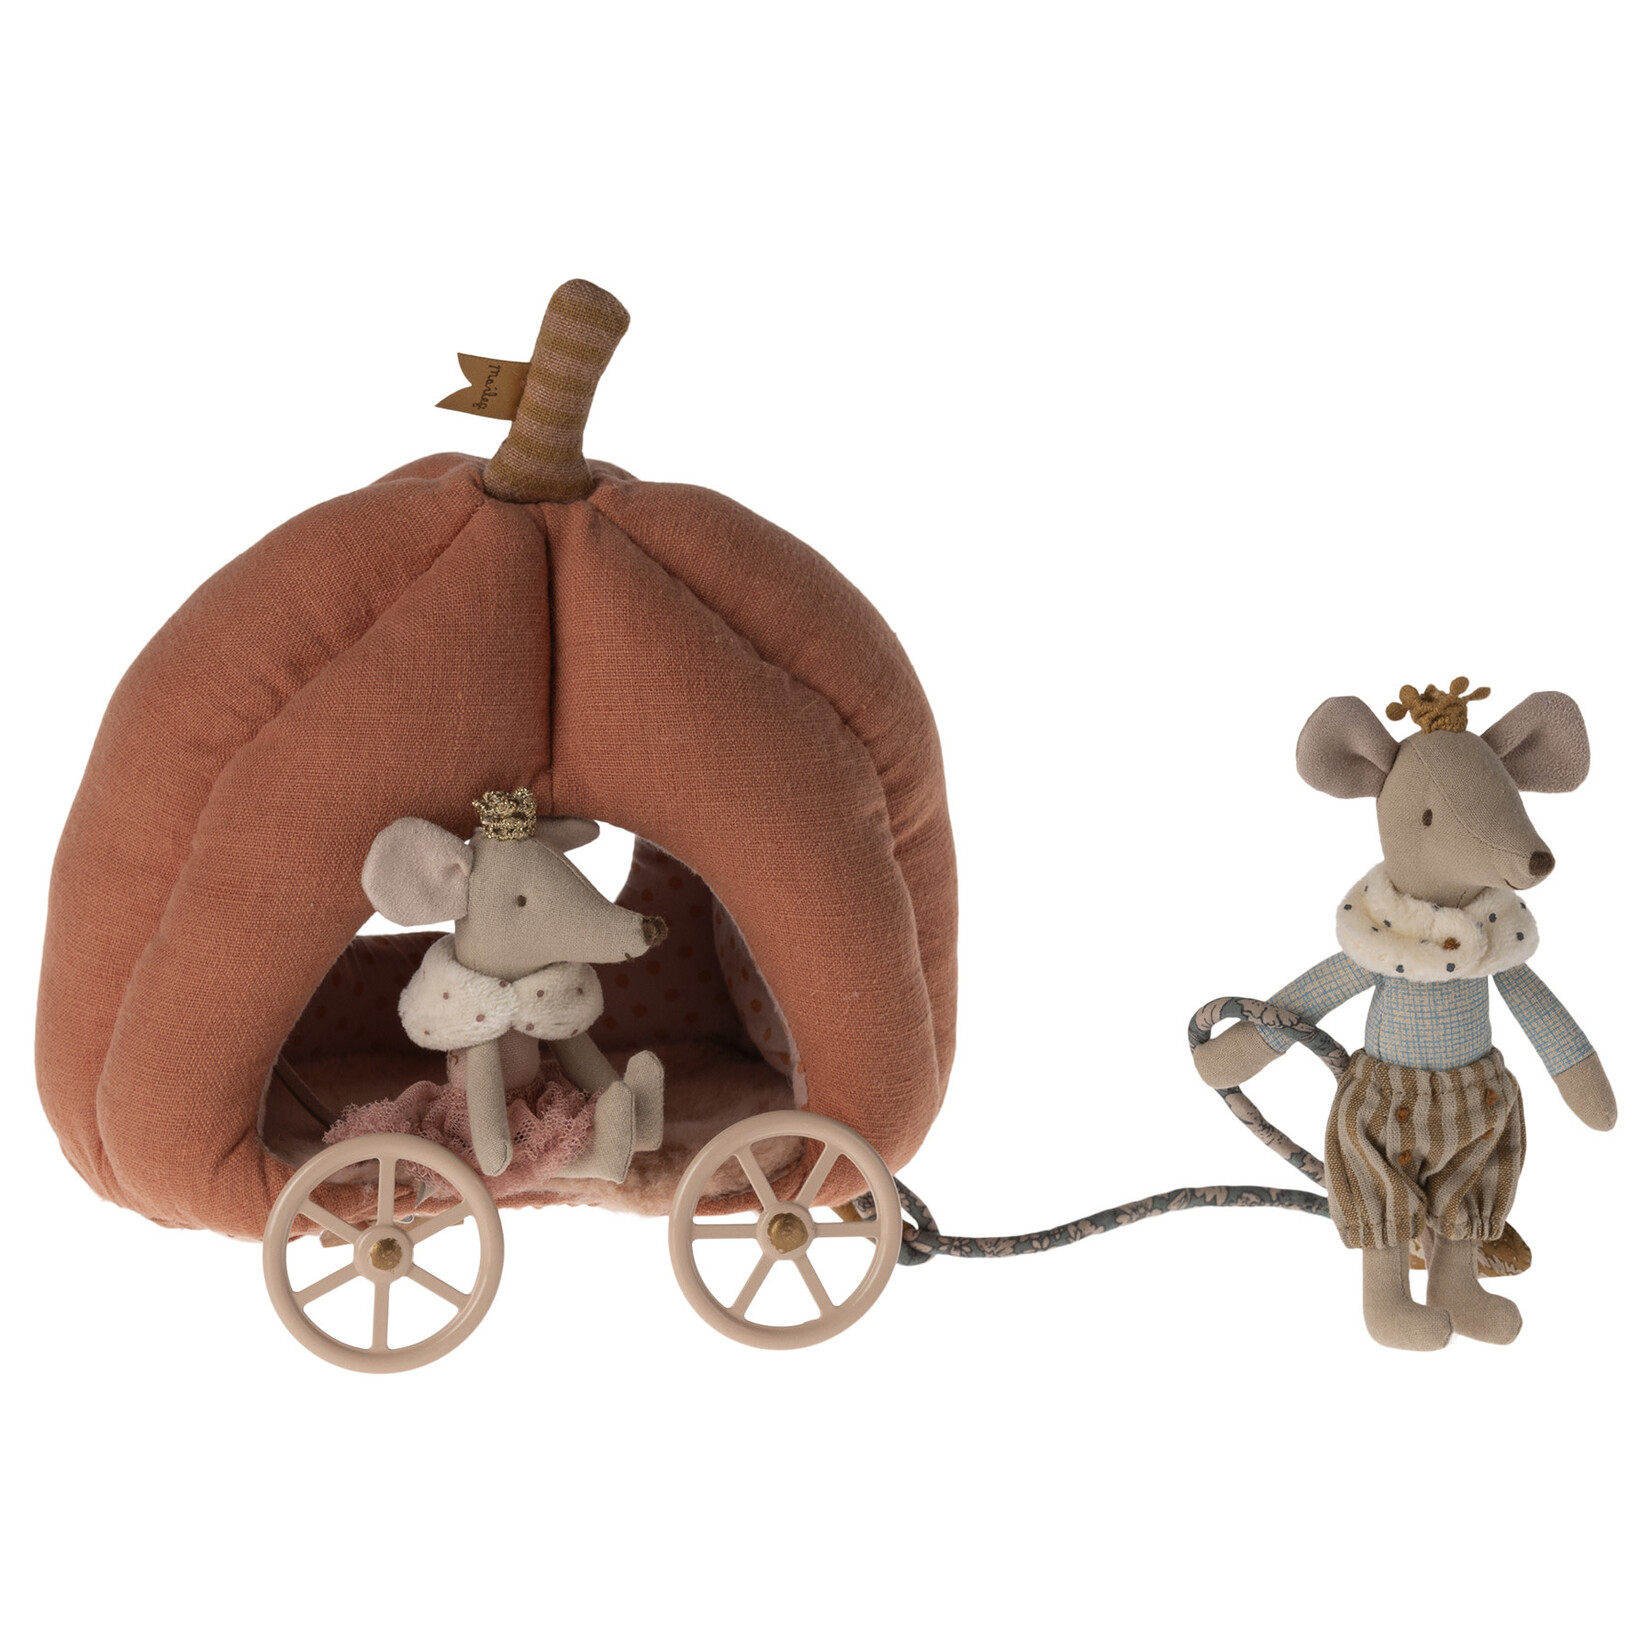 Maileg PRE ORDER Maileg Pumpkin carriage for Mouse - Estimated arrival mid June